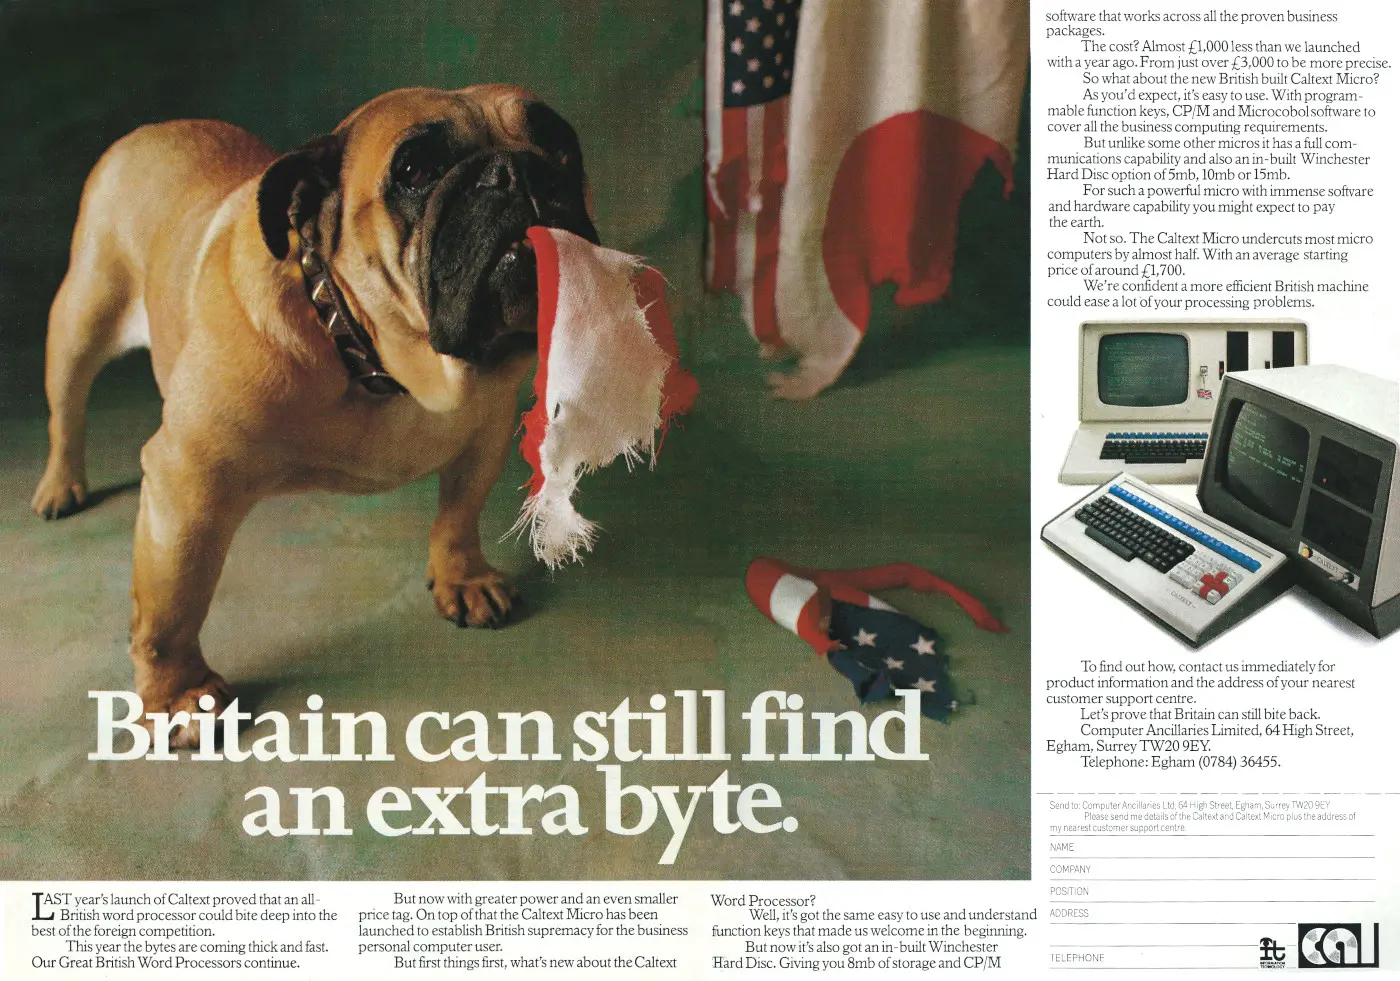 CAL Advert: Britain can still find an extra byte, from Personal Computer World, November 1982